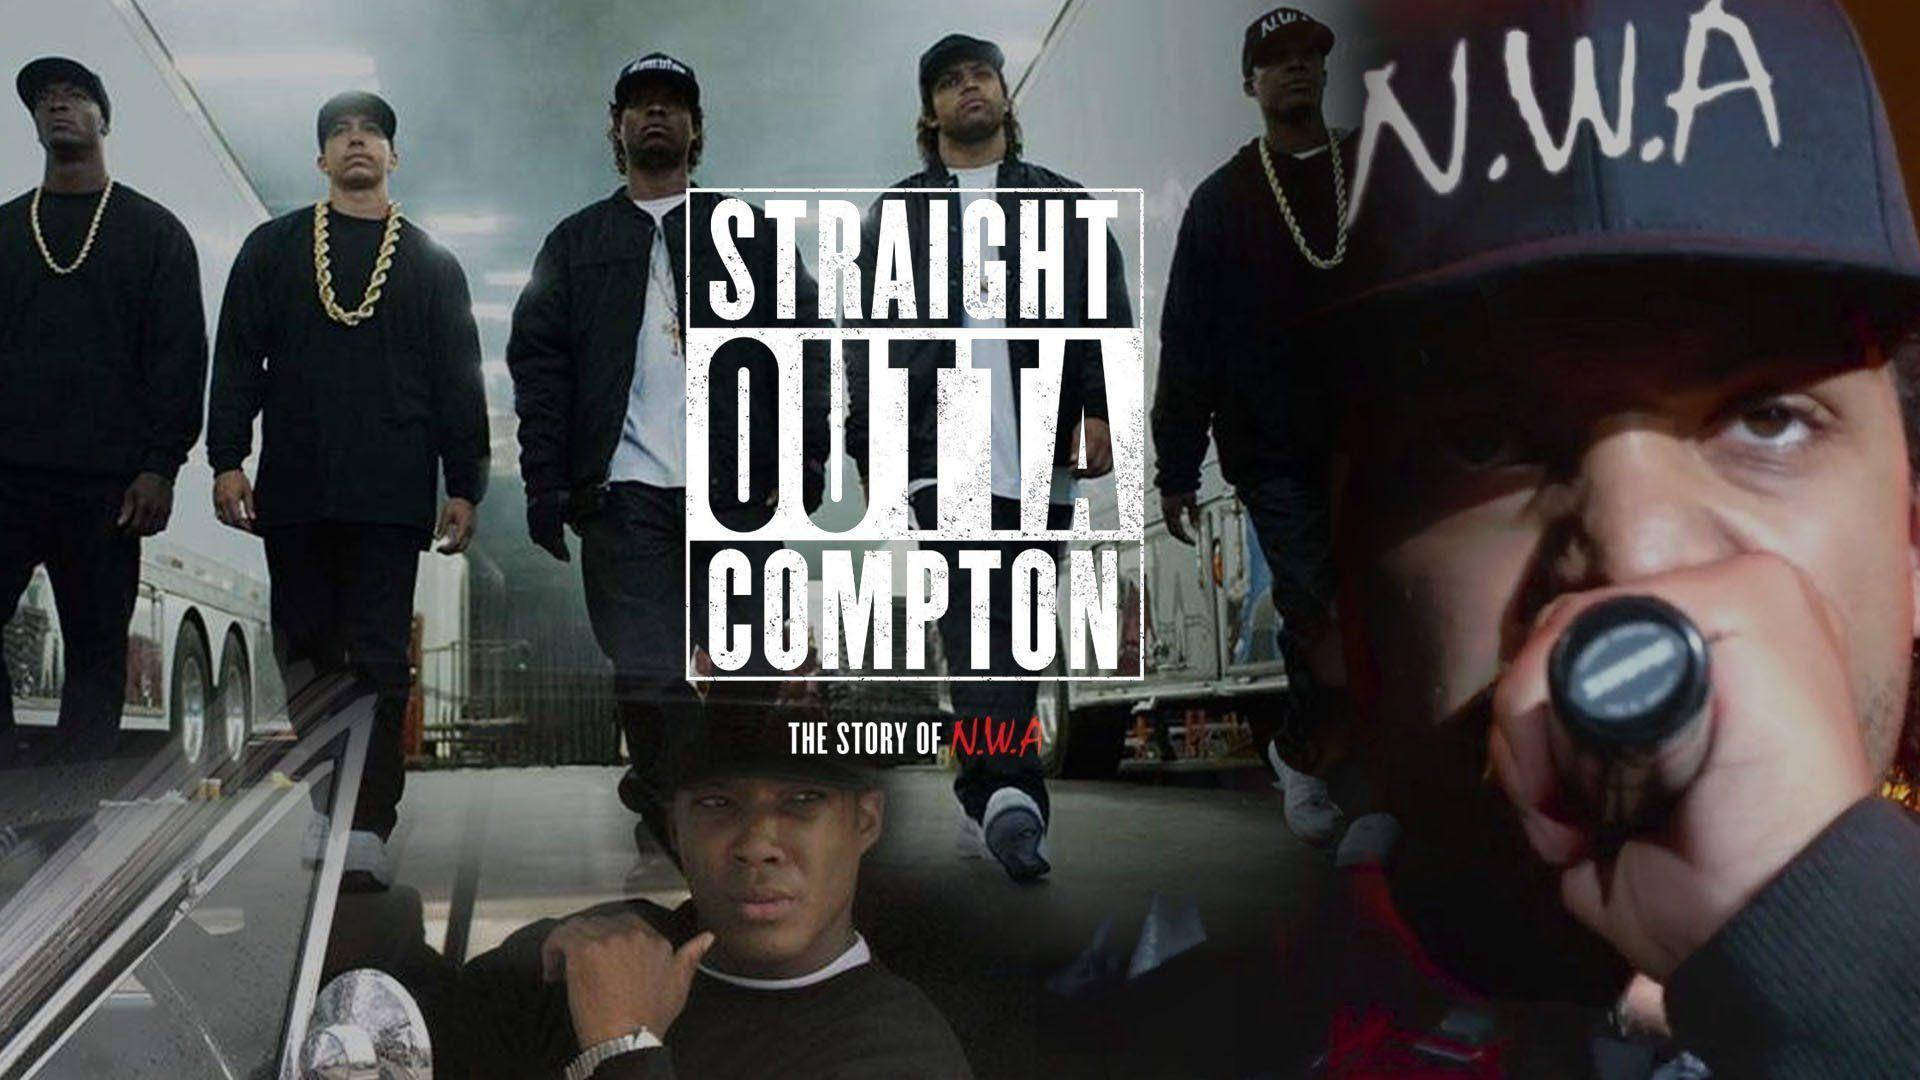 Nw.a. Straight Outta Compton Mix Poster Kunst. Wallpaper